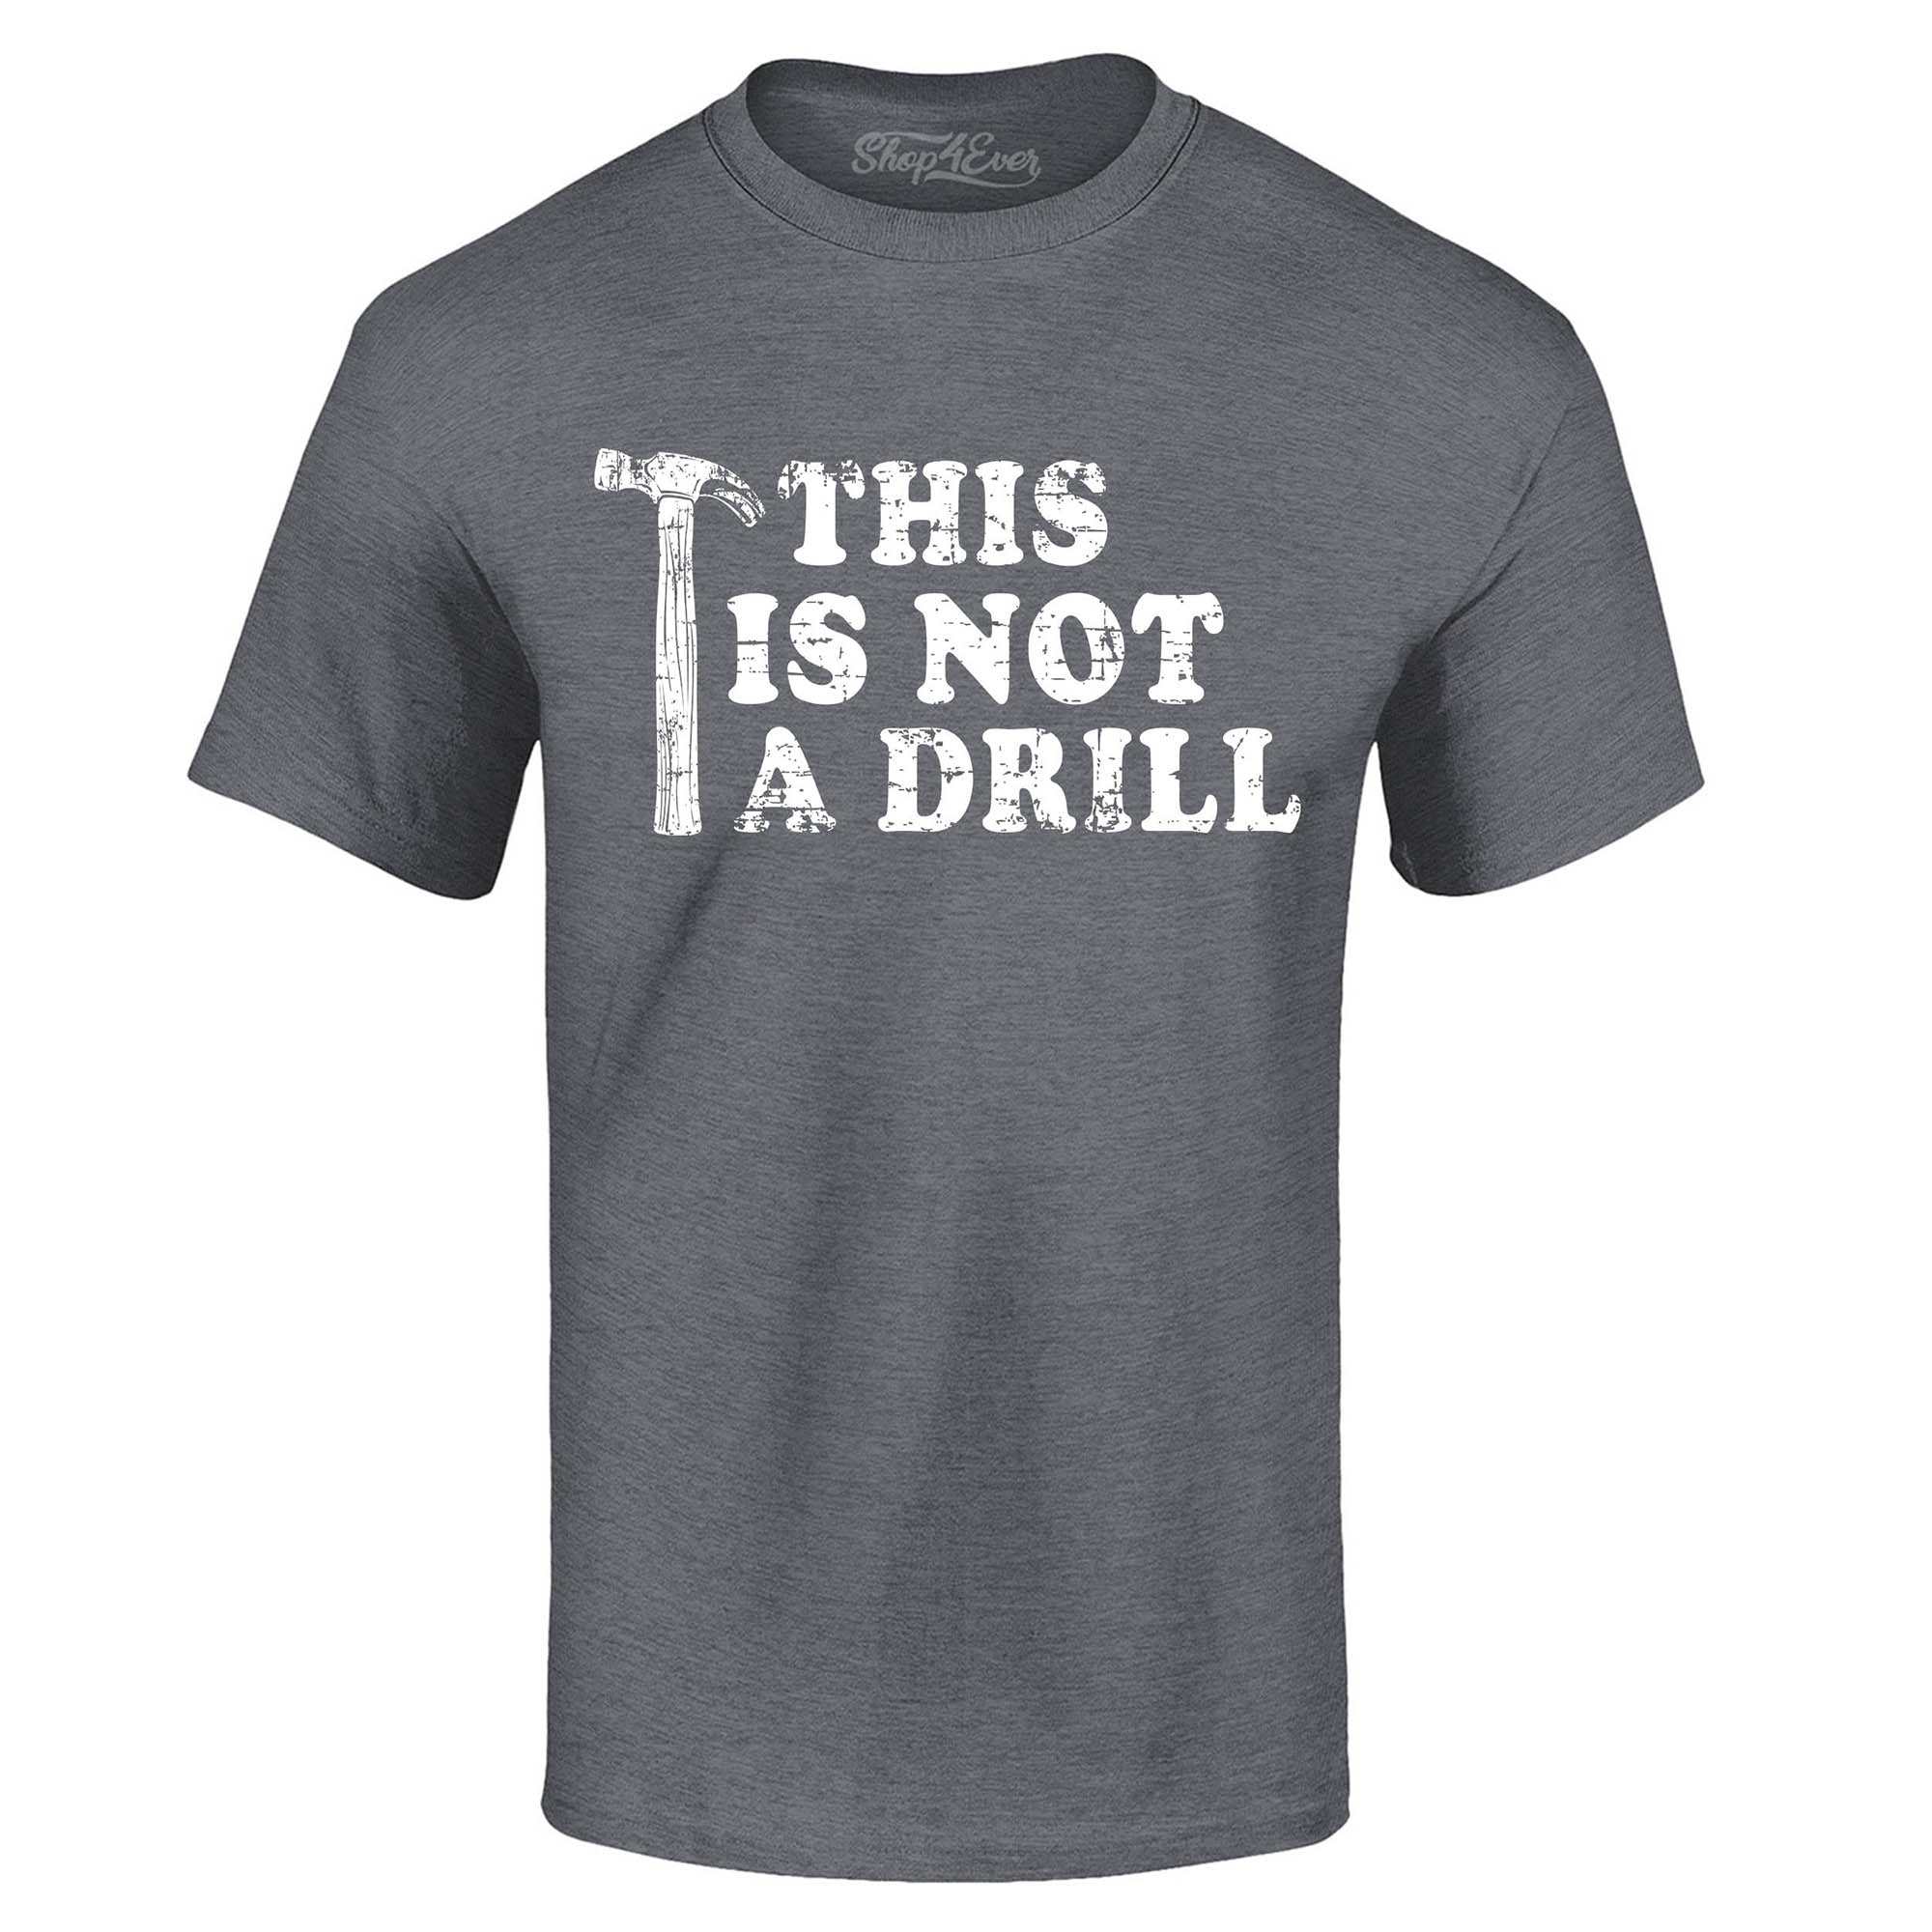 This is Not a Drill T-Shirt Funny Hammer Tool Tee